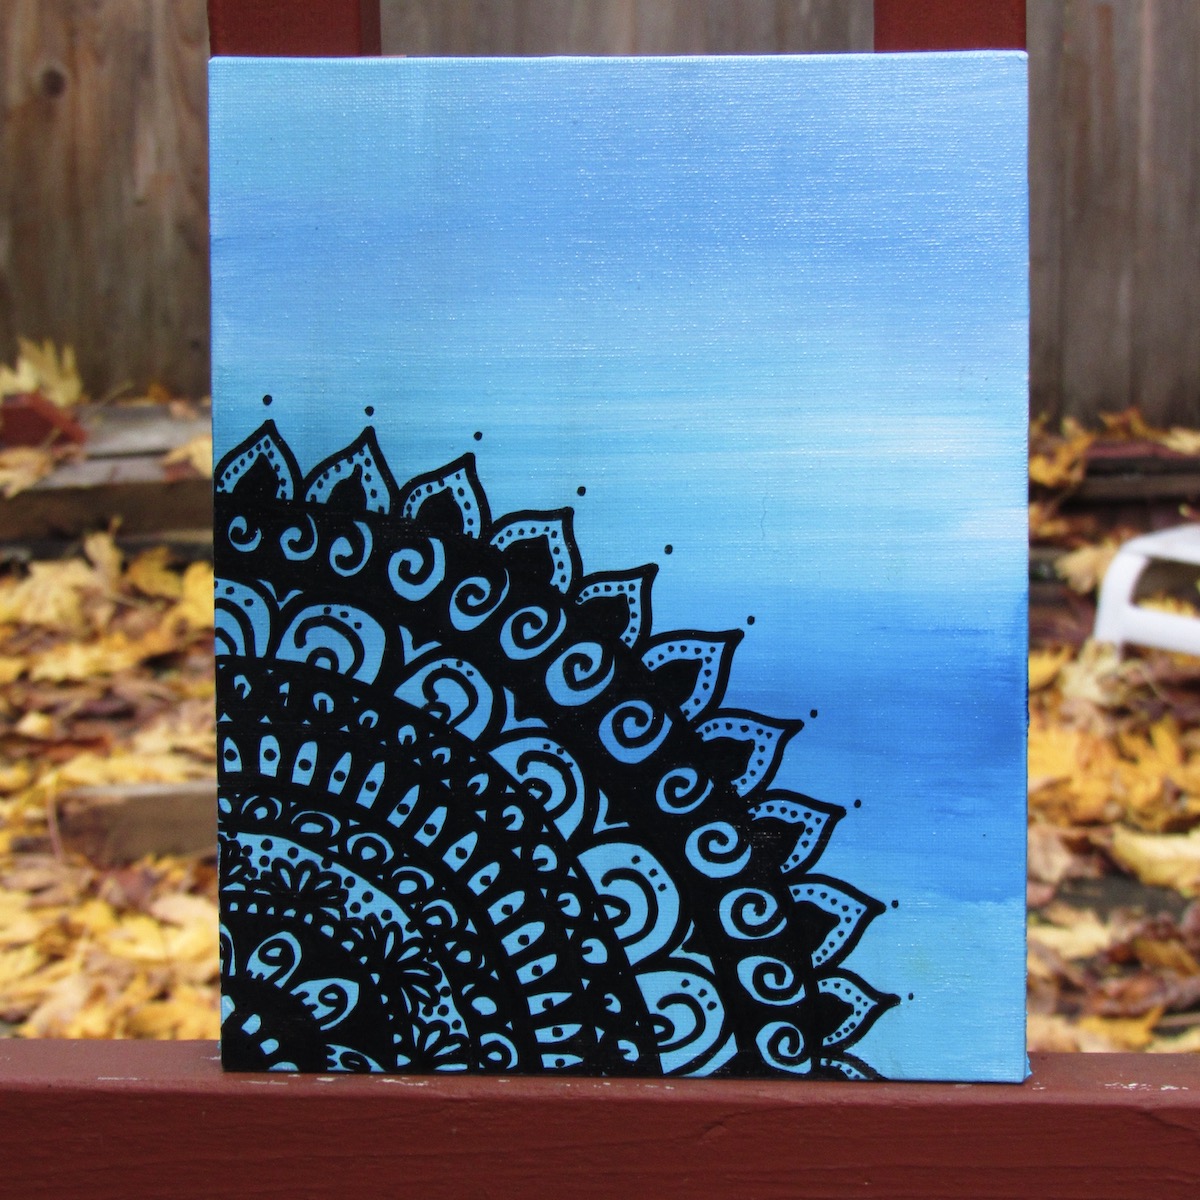 Blue 8x10 painting